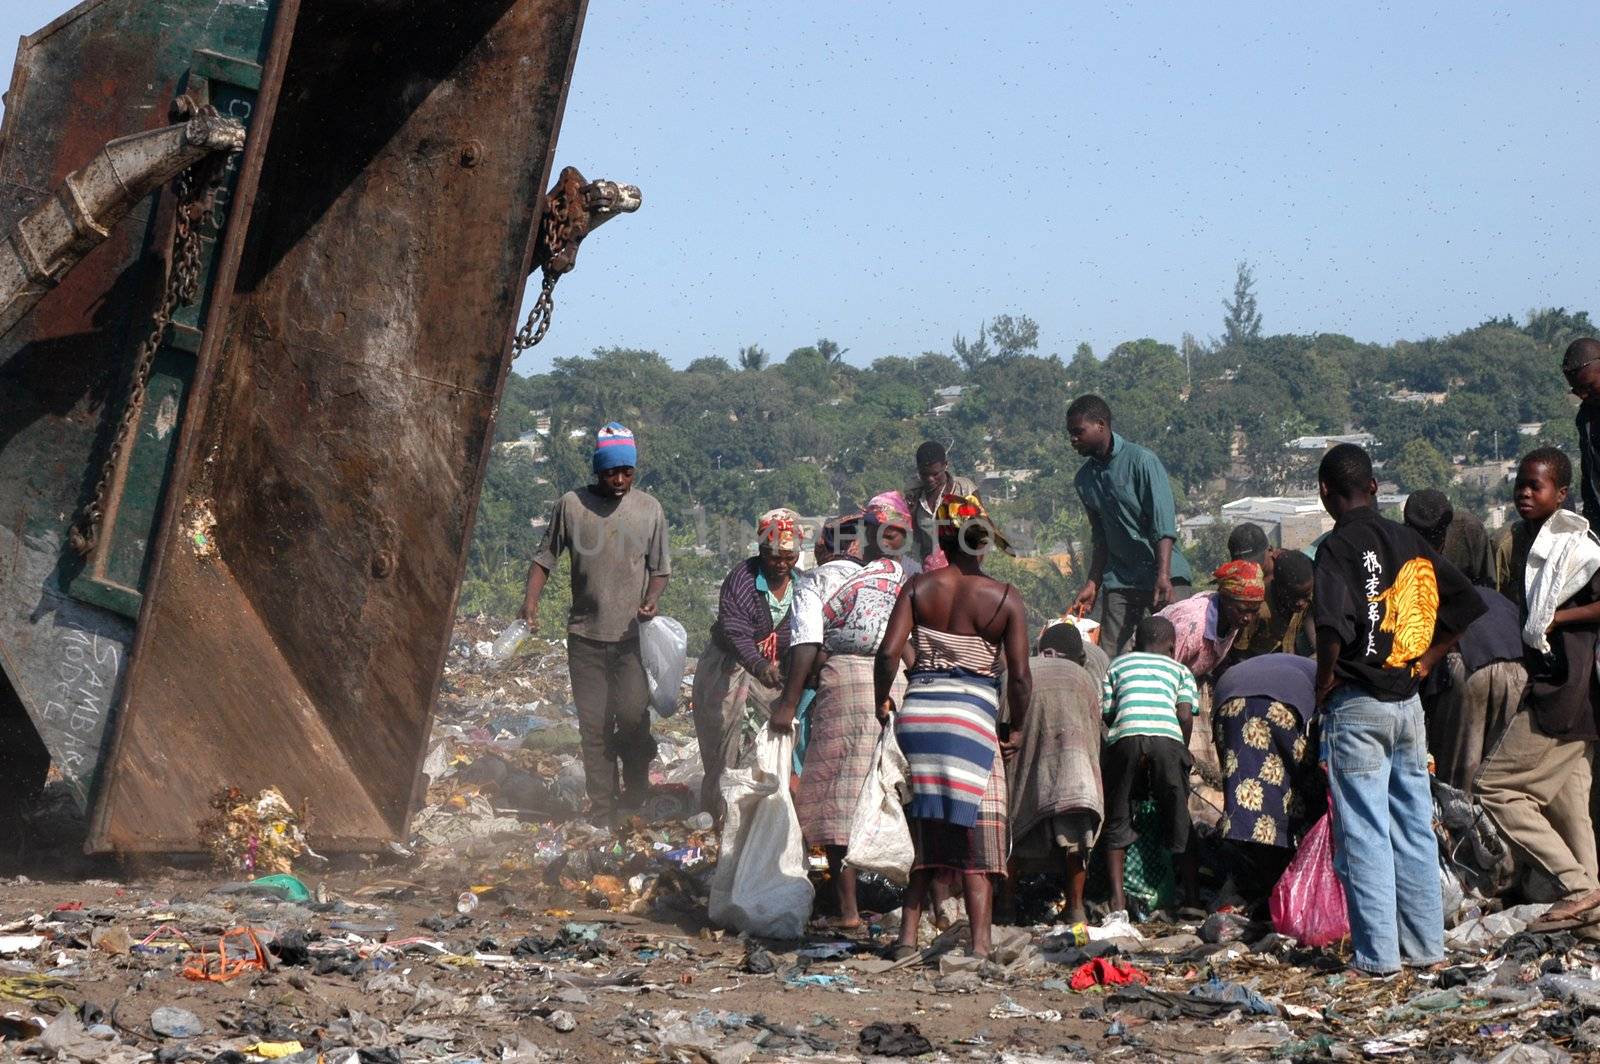 Maputo, Mozambique - May 14, 2004
 African poor in the dump of the capital of Maputo in Mozambique. There are many street people in the garbage looking for food, bottles, iron Latin resell